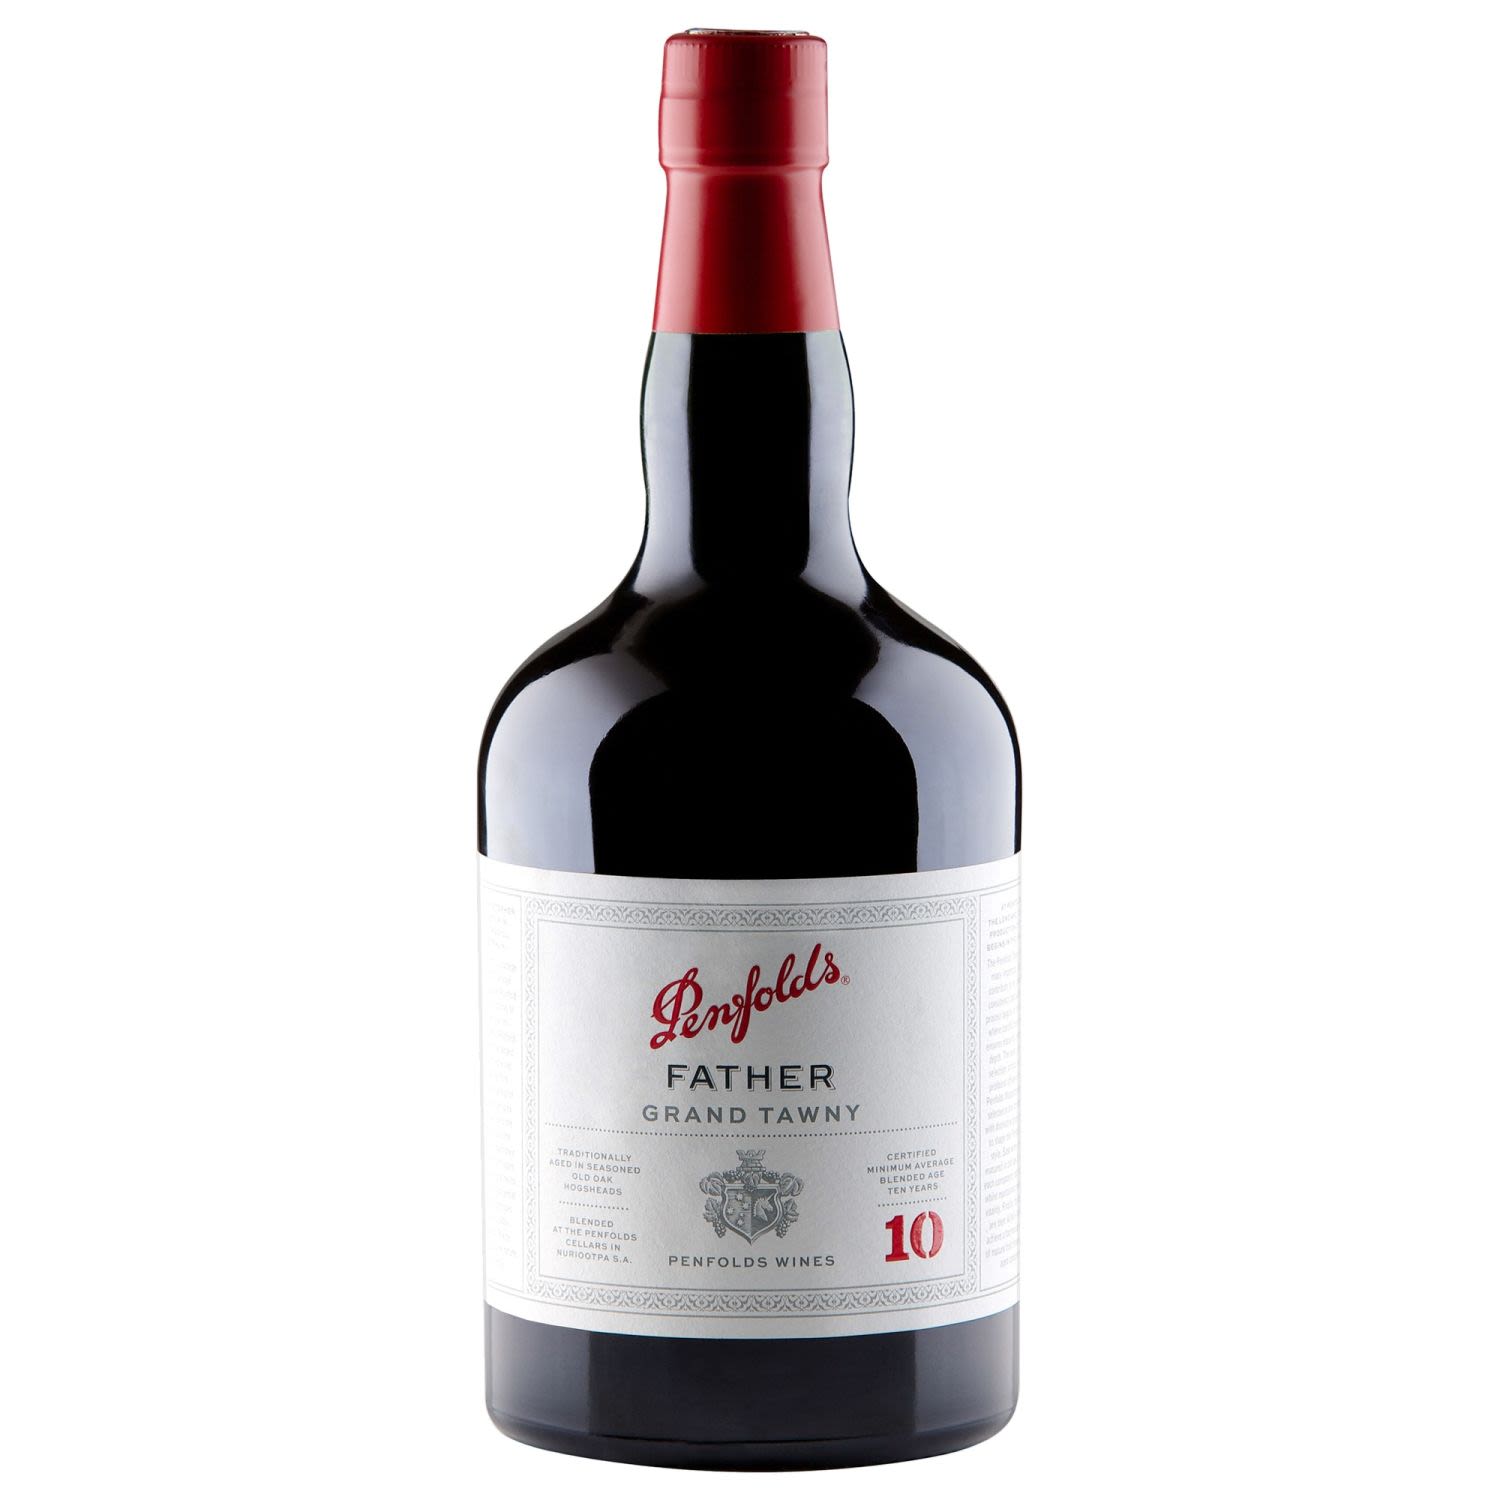 Deep tawny with a red hue & distinctive yellow green edge. Vibrant & fresh with concentrated barrel aged characters, with the most elegant palate of the Penfolds tawny portfolio being soft, round & intense with fruit. Oak & maturation characters all in harmony.<br /> <br />Alcohol Volume: 18.50%<br /><br />Pack Format: Bottle<br /><br />Standard Drinks: 11</br /><br />Pack Type: Bottle<br /><br />Country of Origin: Australia<br /><br />Region: South Australia<br /><br />Vintage: Non Vintage<br />